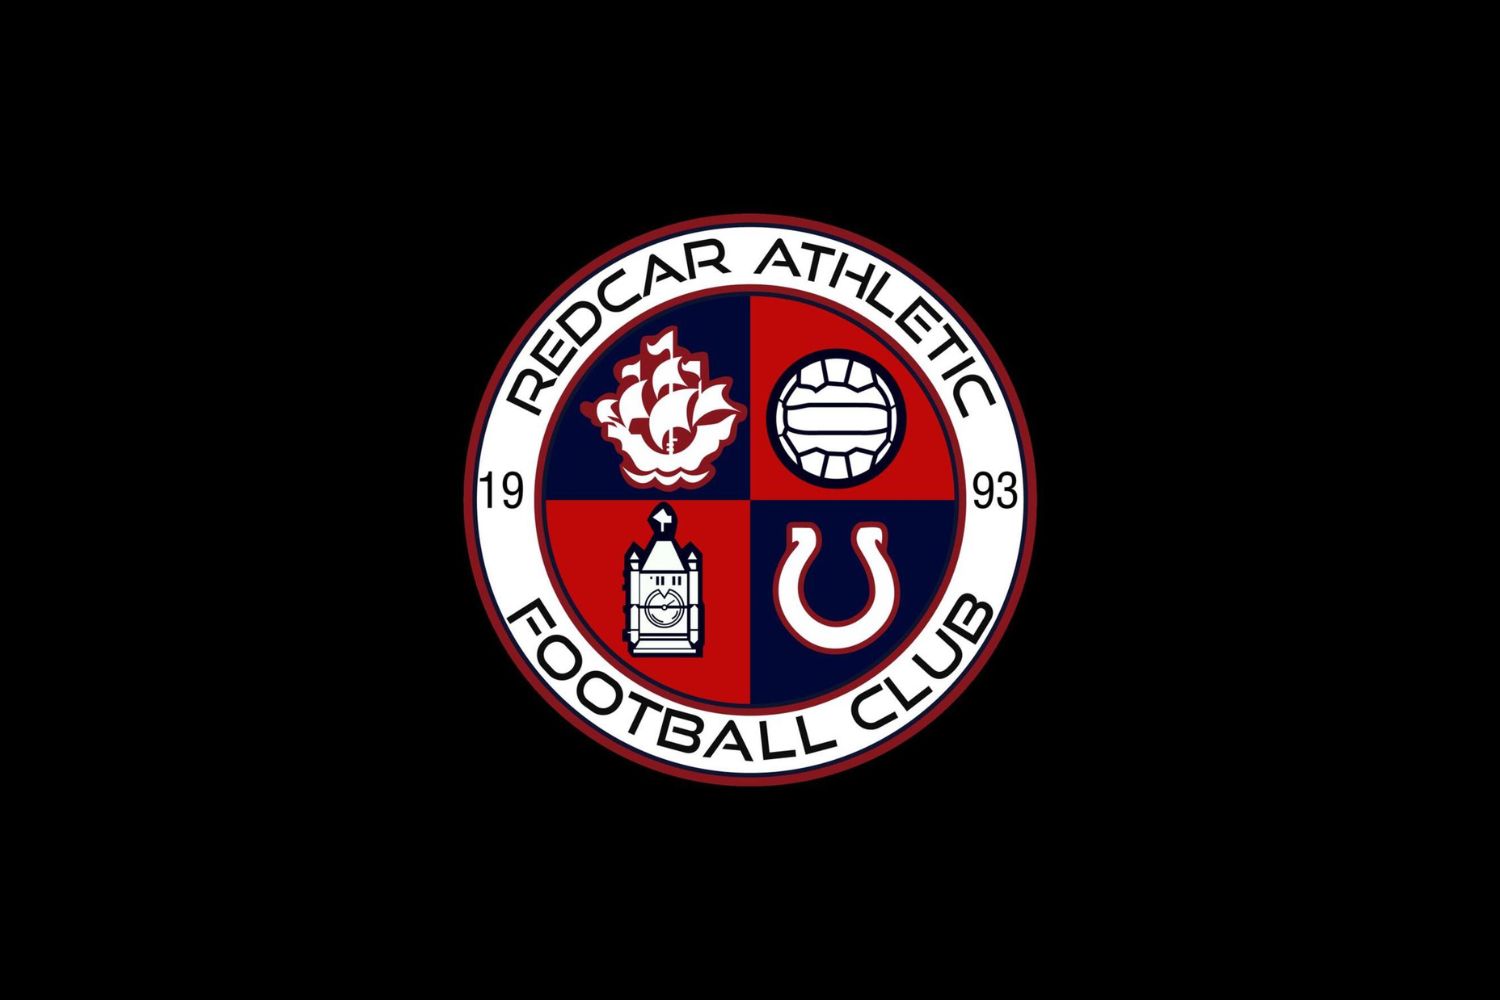 redcar-athletic-fc-20-football-club-facts